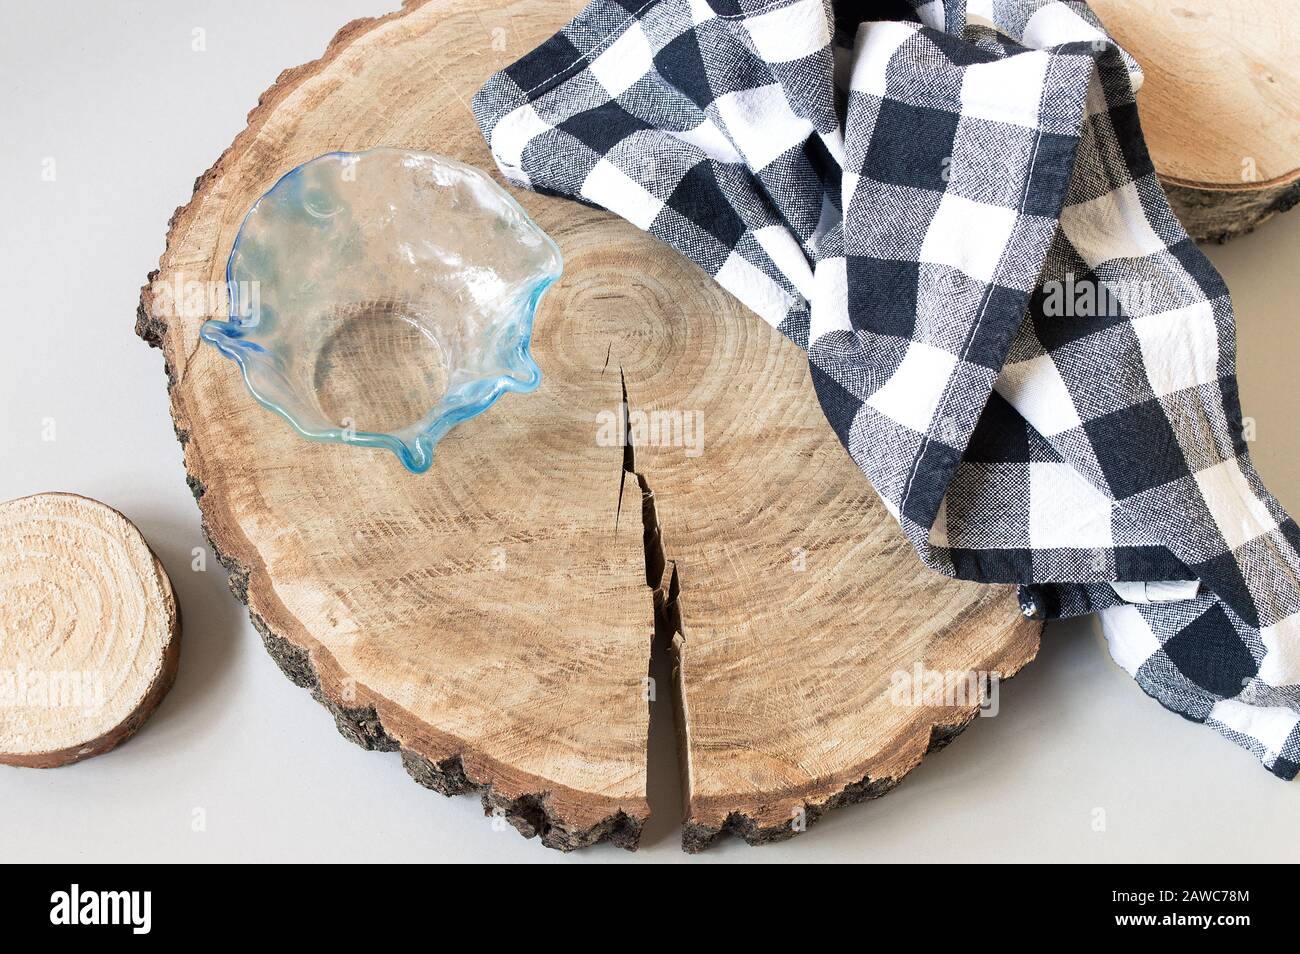 Wooden rounds decoration for serving food. Oak cutting board with a crack, glass bowl and checked black and white kitchen towel Stock Photo